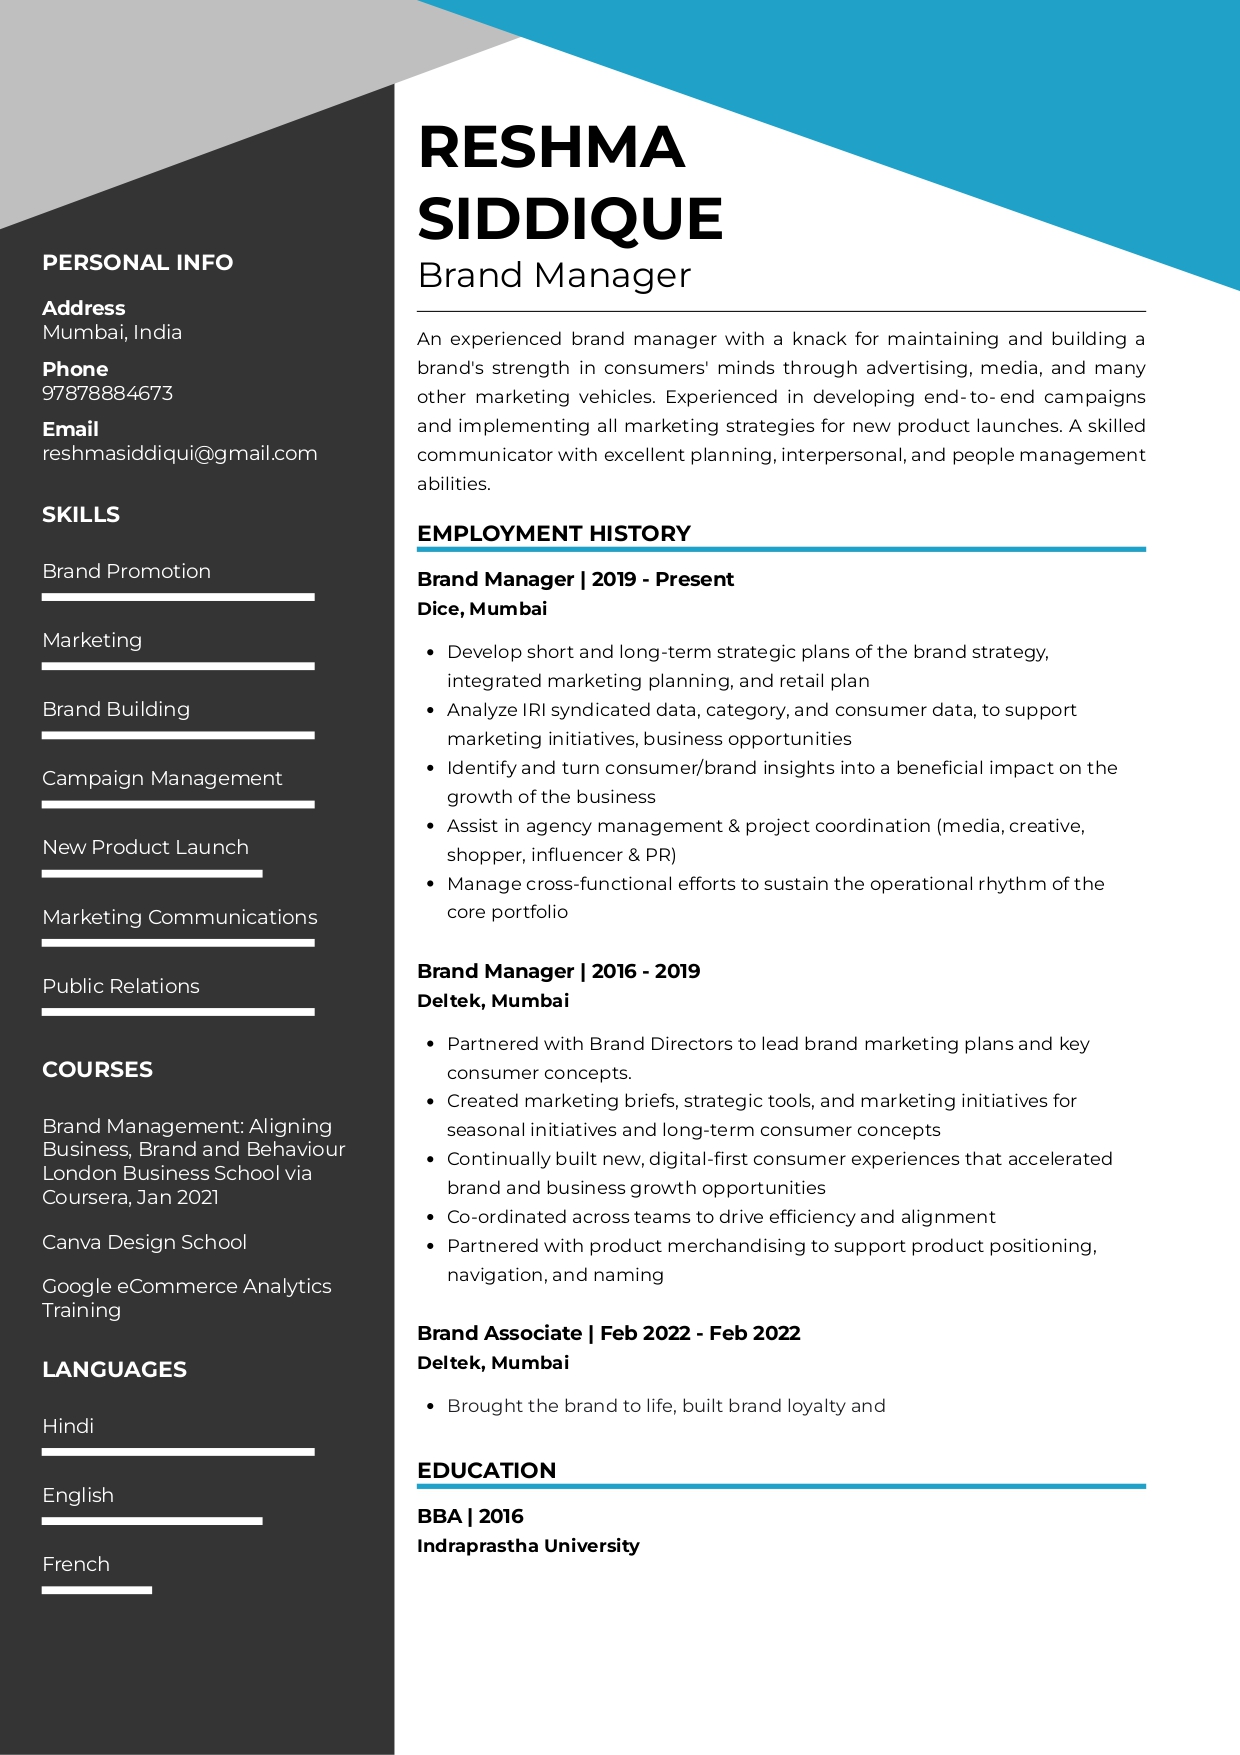 Sample Resume of Brand Manager | Free Resume Templates & Samples on Resumod.co